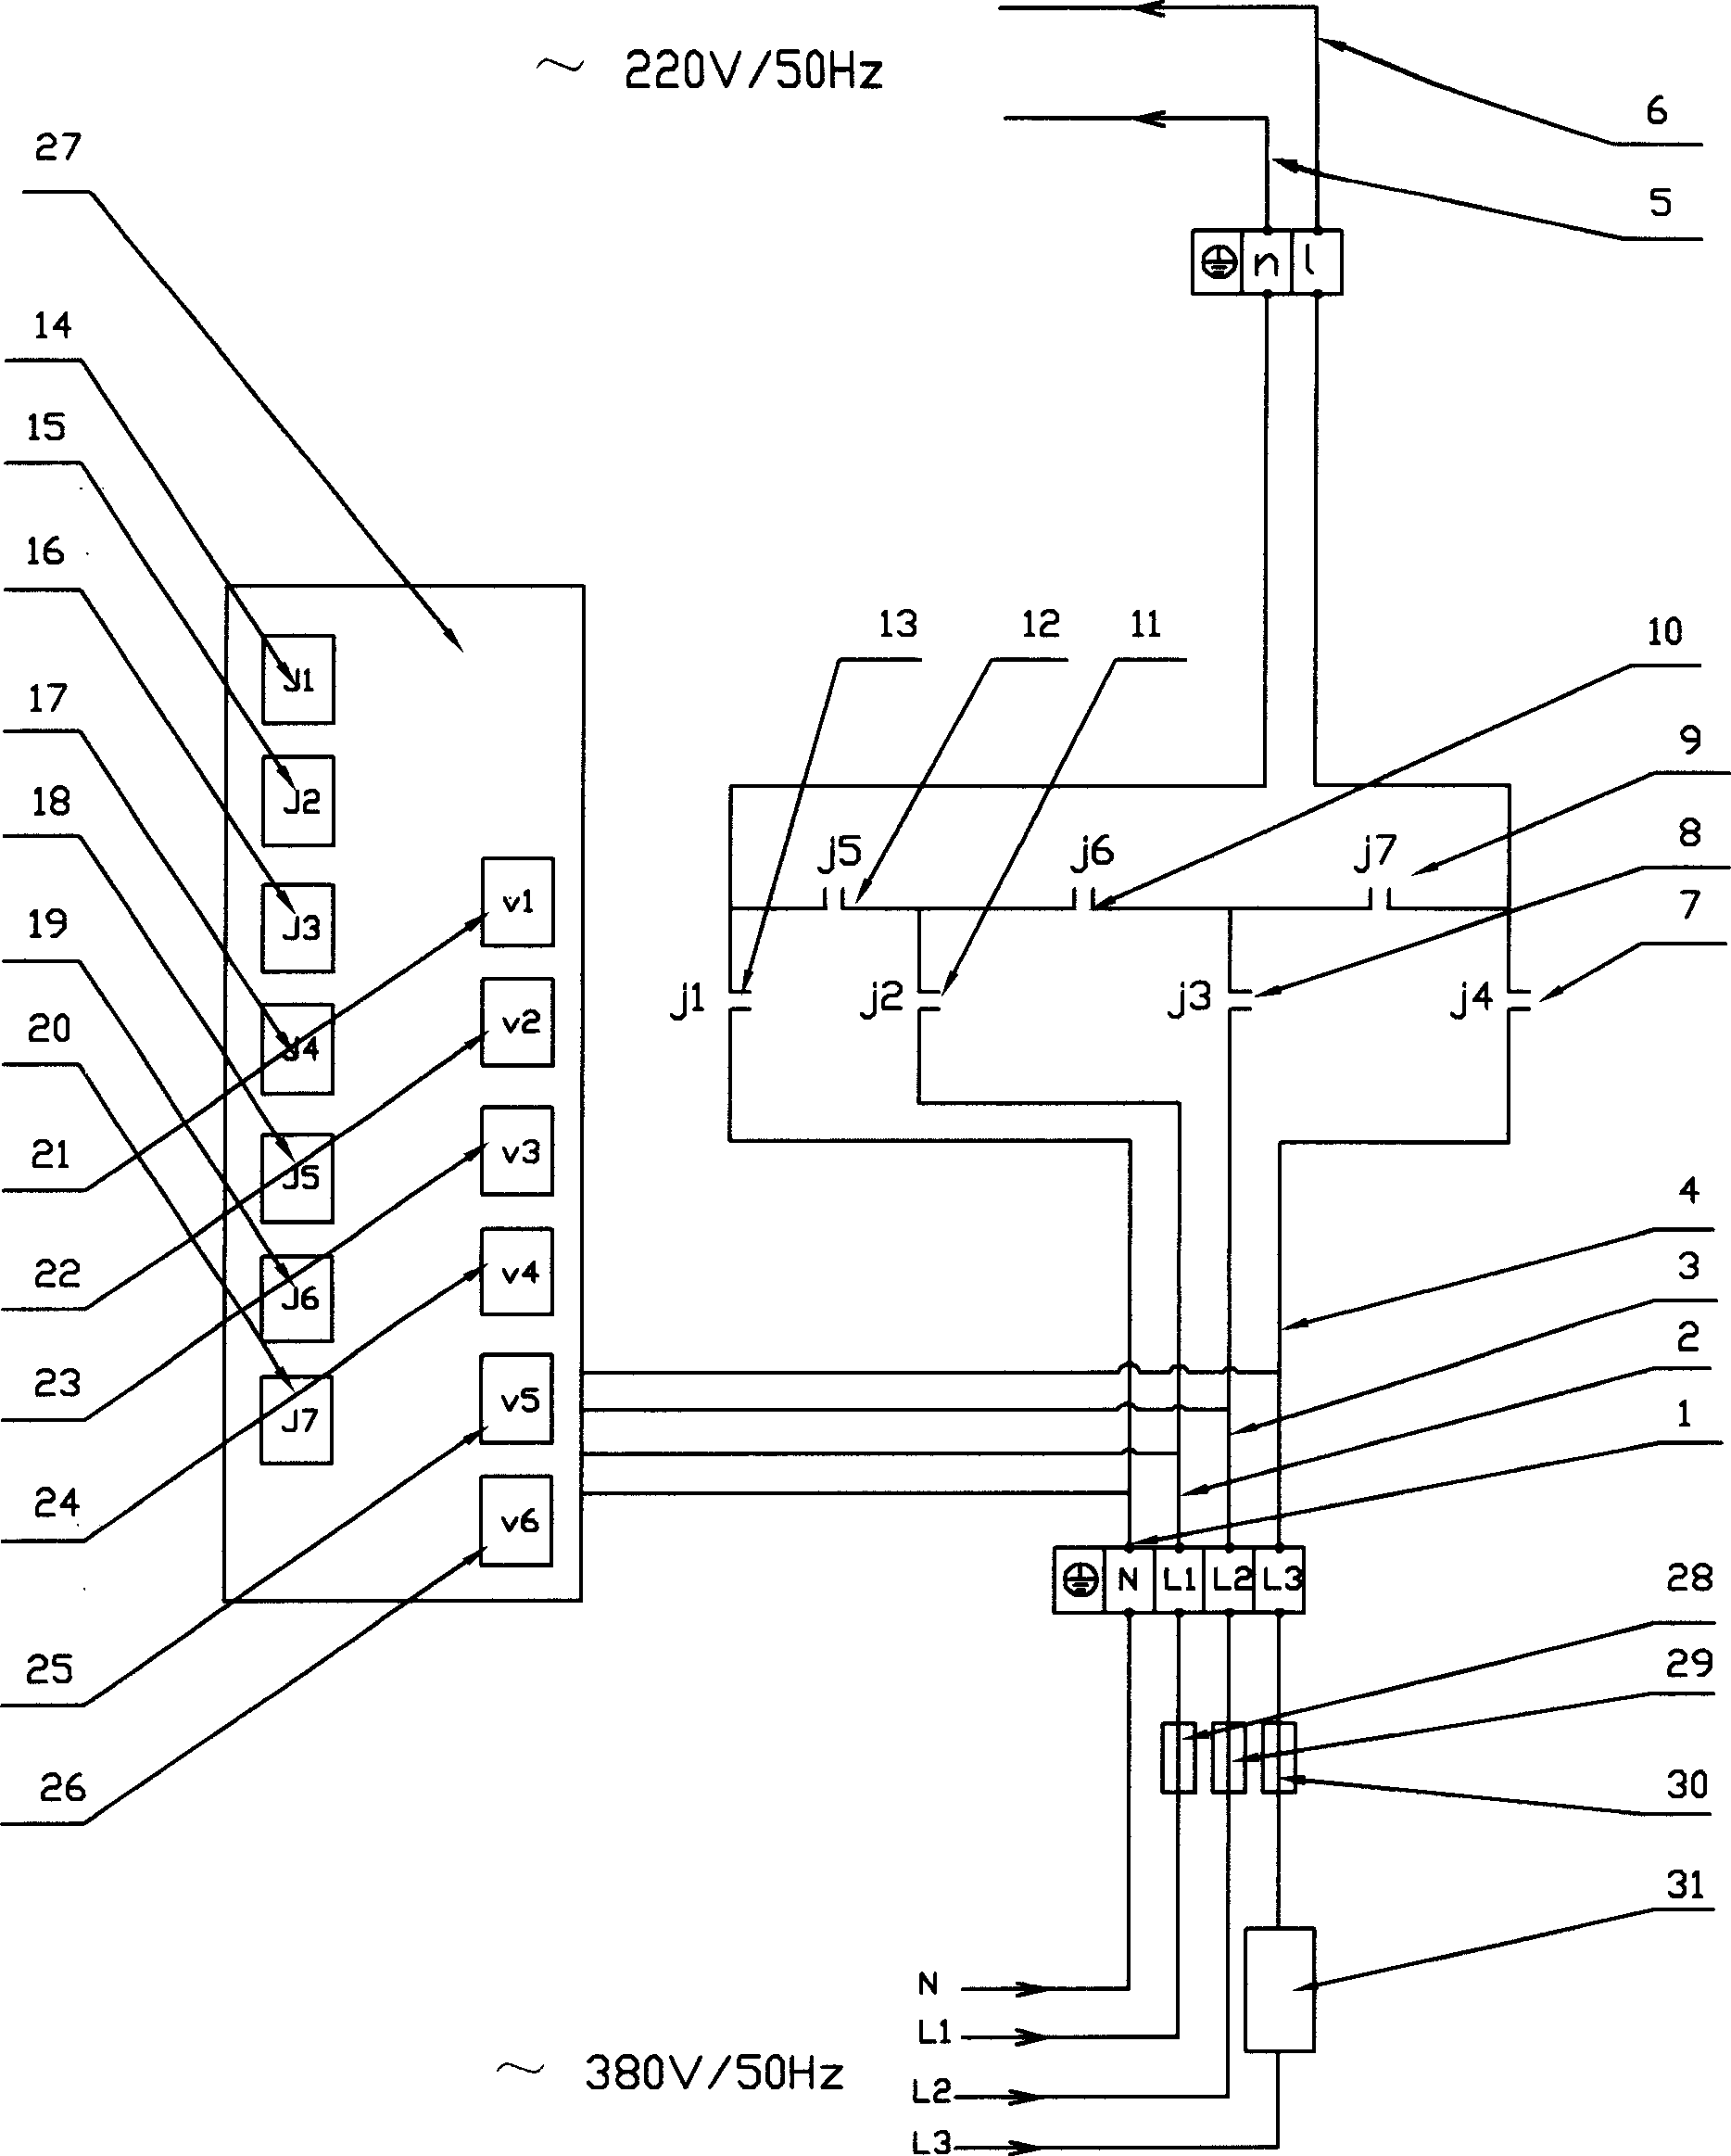 Converter for changing three phase power into single phase power